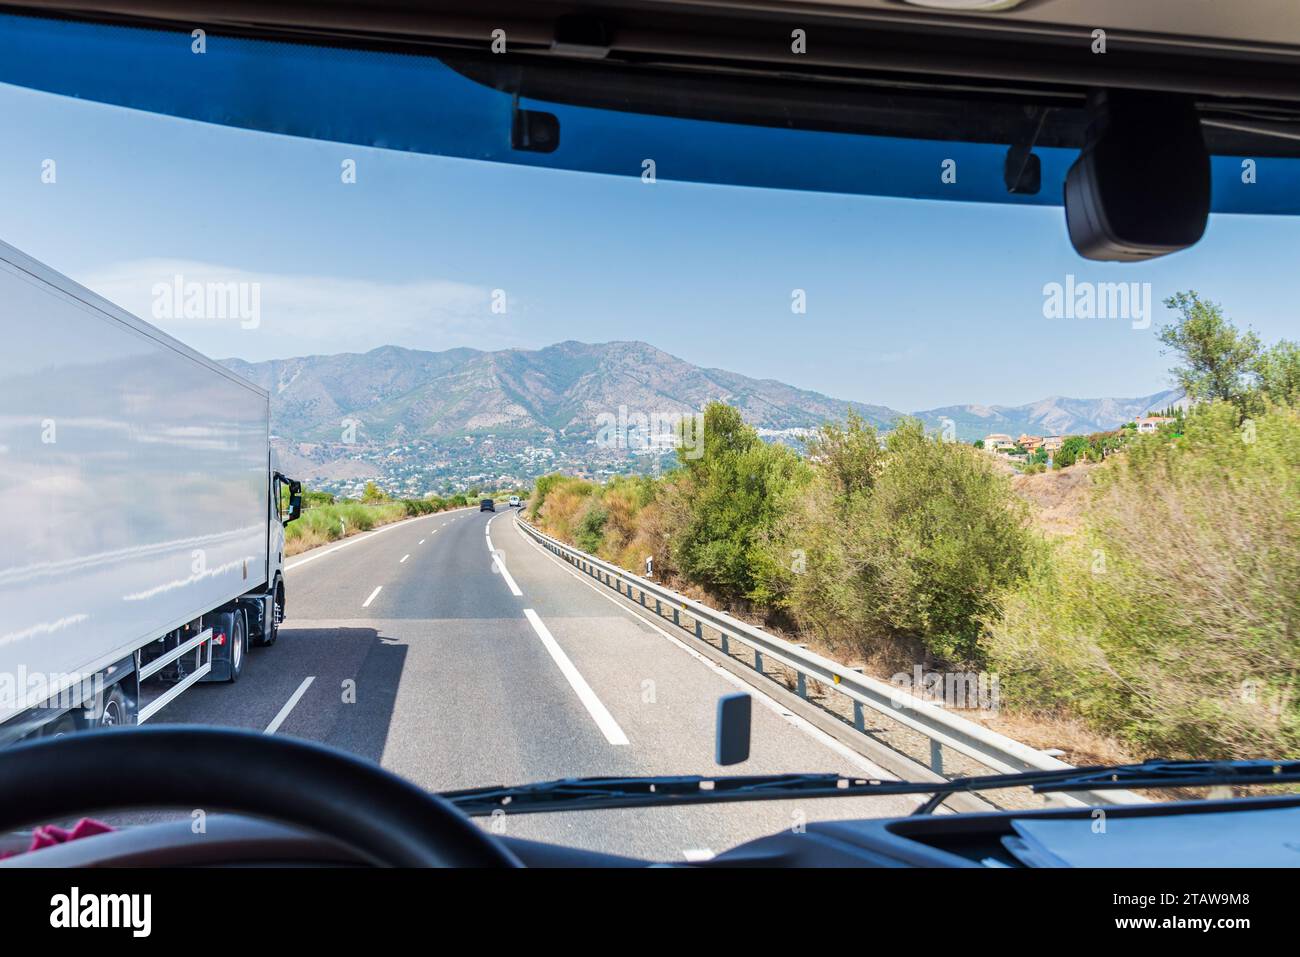 View from the driver's seat of a truck of another refrigerated truck overtaking on a highway. Stock Photo